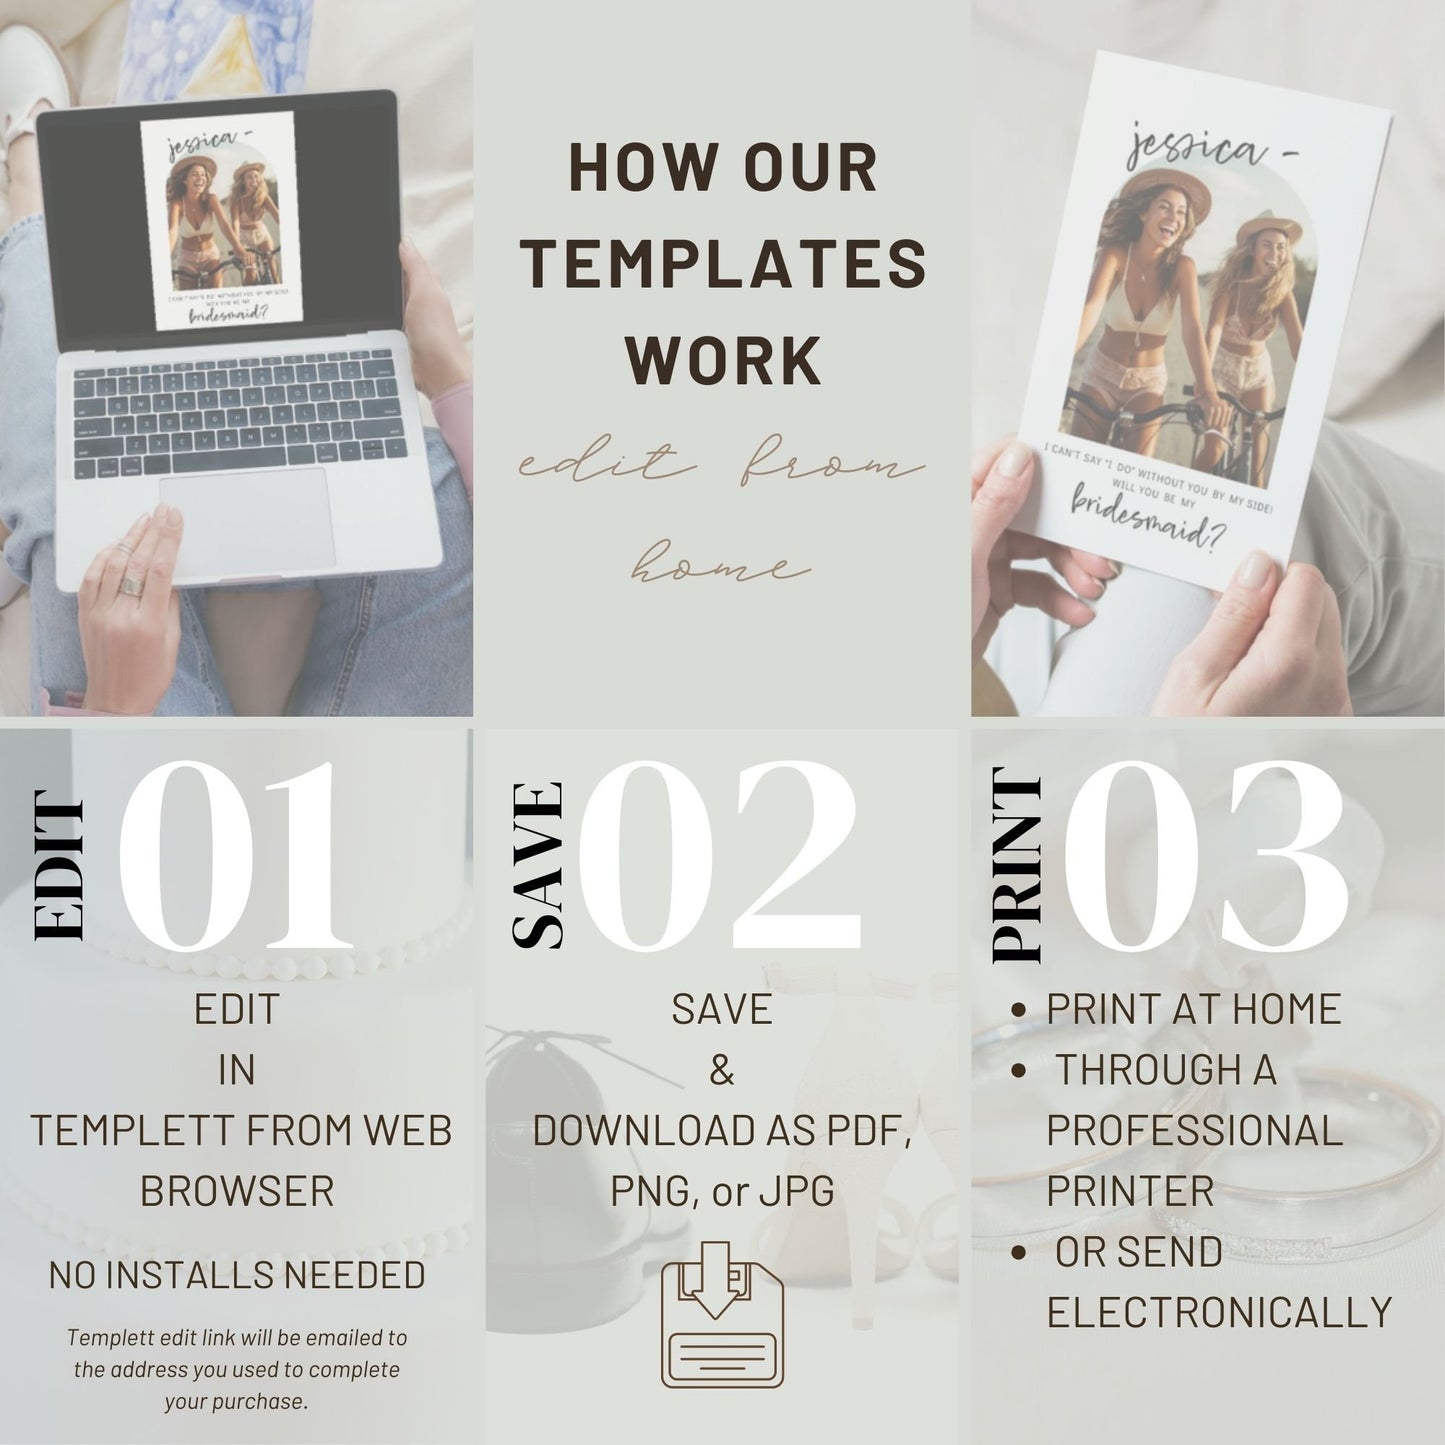 Modern Date Night Suggestions Sign | Date Night Ideas Sign | Date Night Cards | Up to Date | Date Night Template